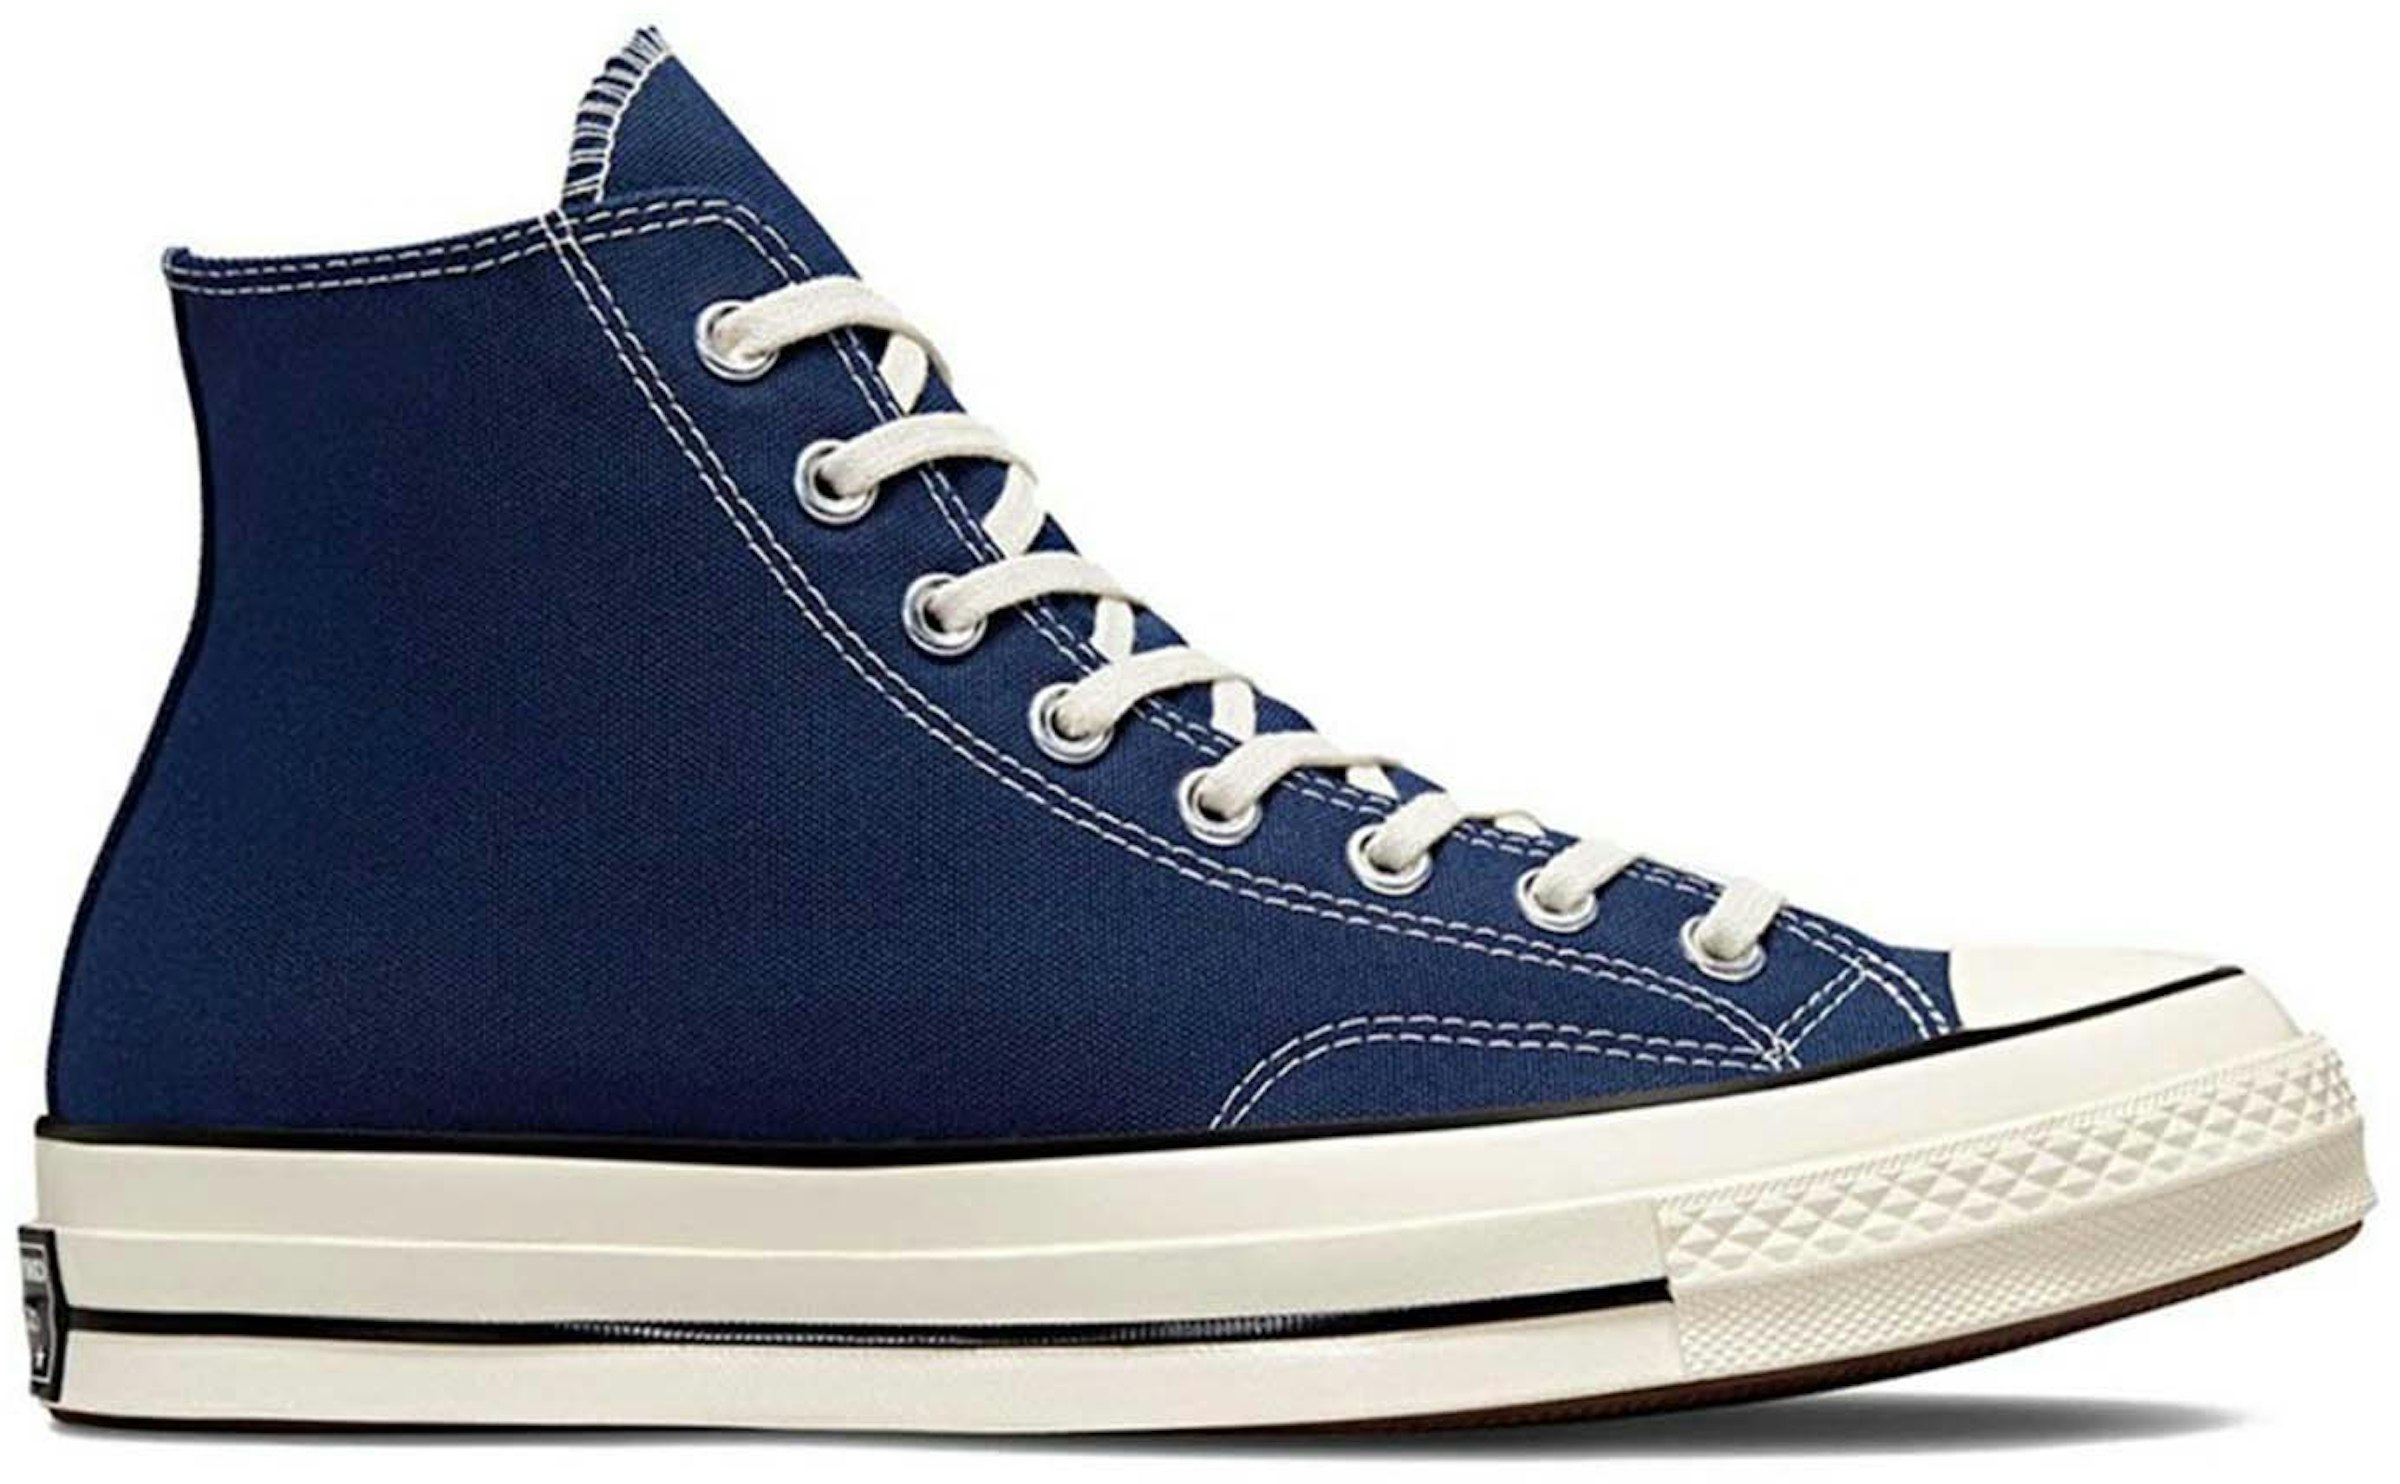 Converse Chuck Taylor All-Star Hi Recycled Canvas Midnight Navy - 172676C -